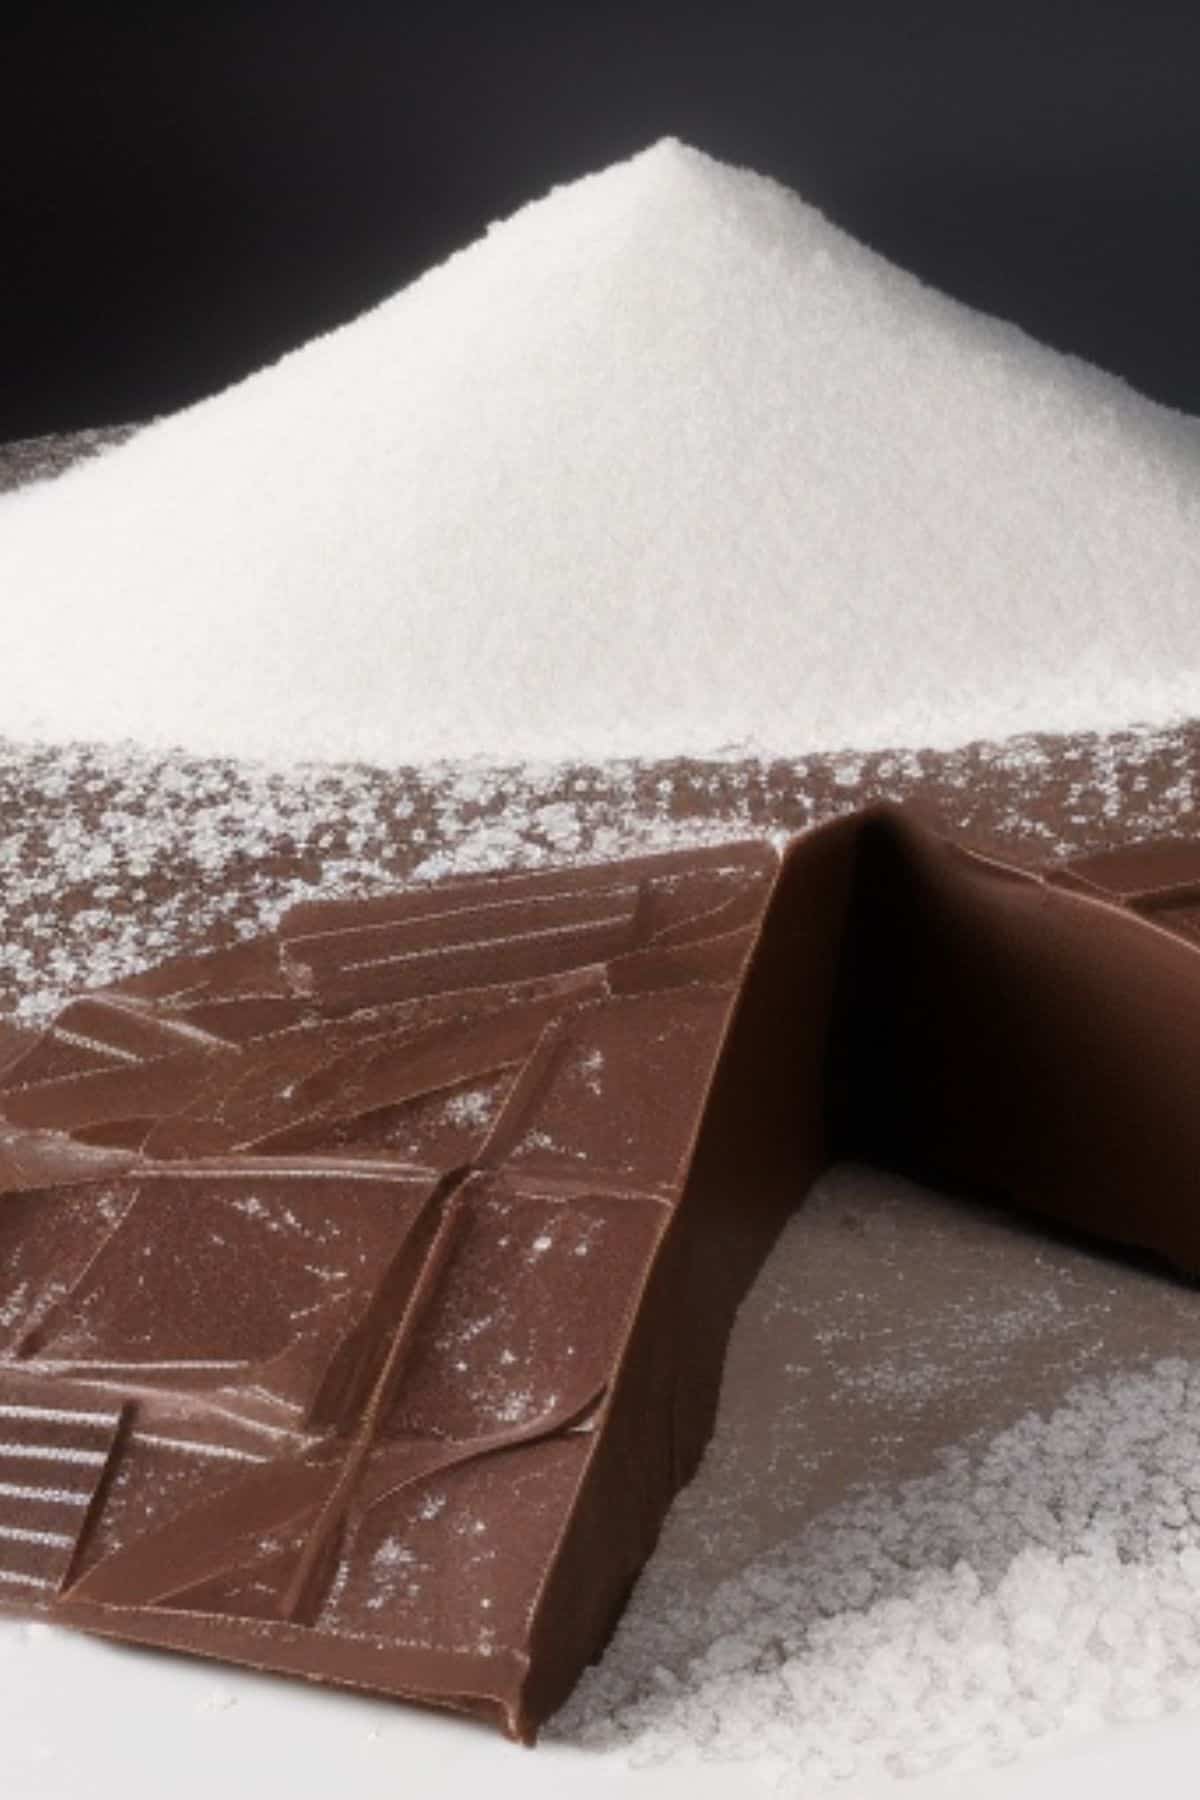 squares of chocolate with a mountain of sugar behind them.